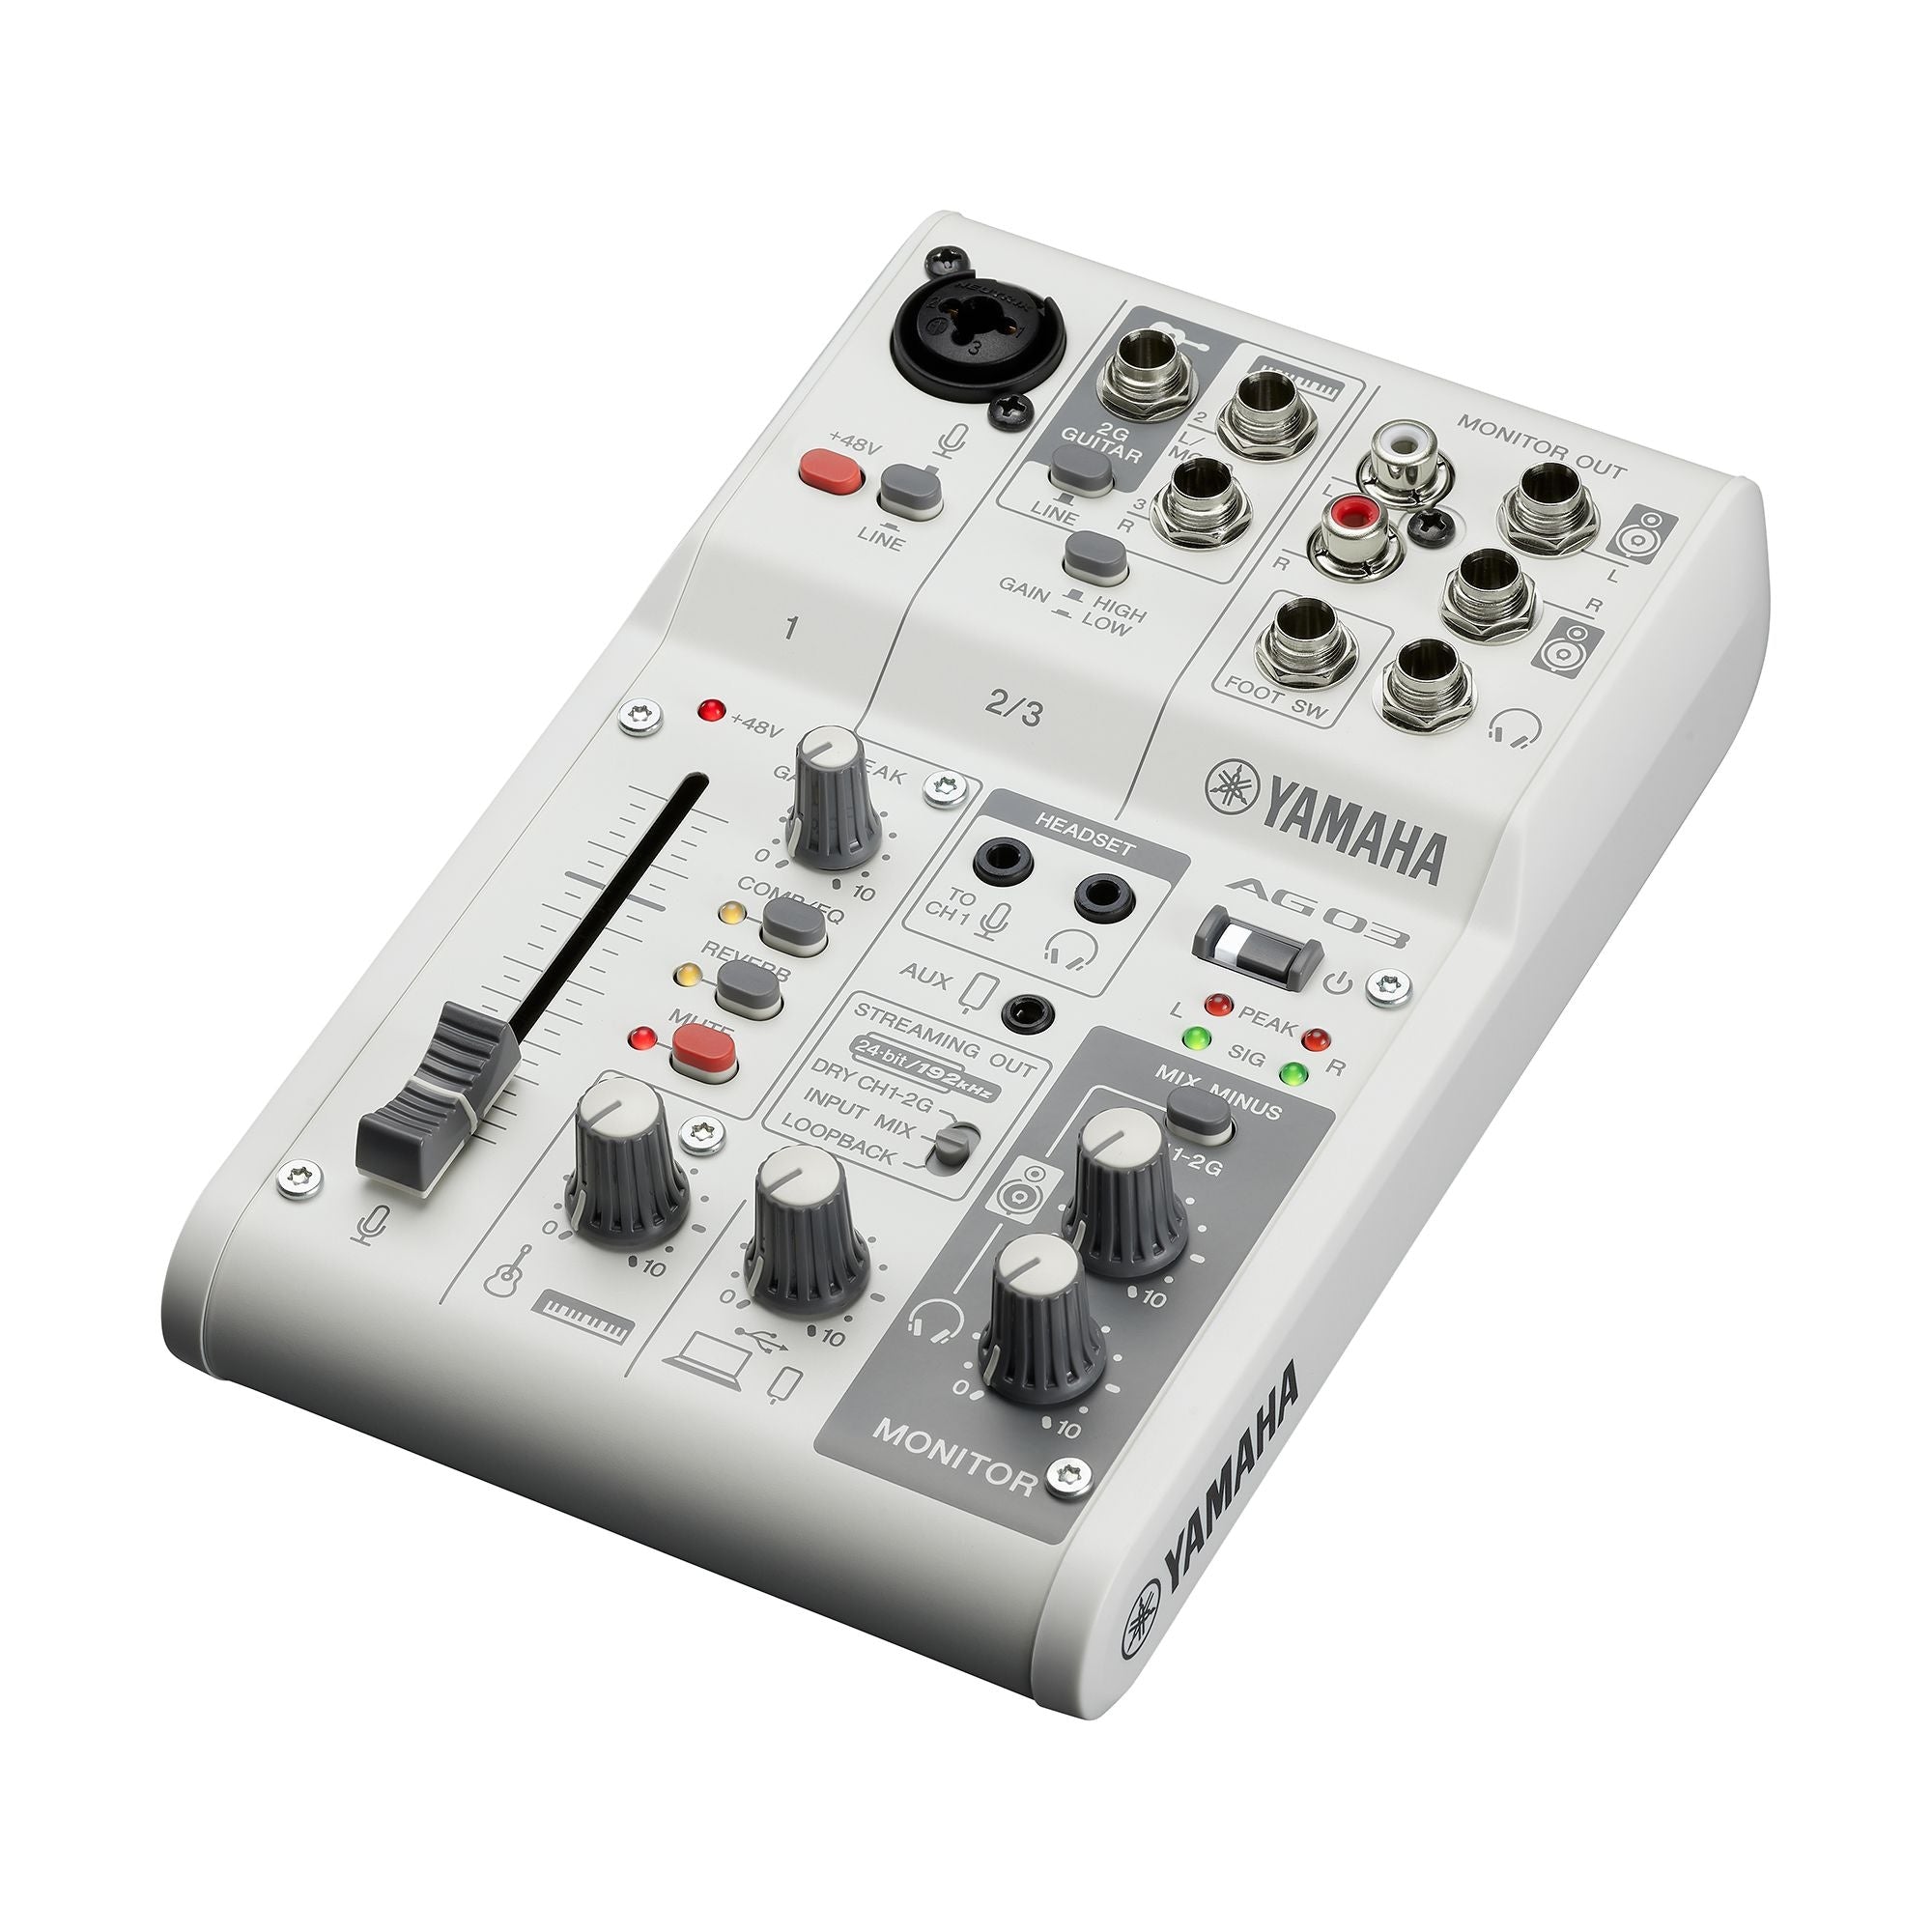 Yamaha Ag03 Mk2 3-Channel Mixer And Usb Audio Interface - White